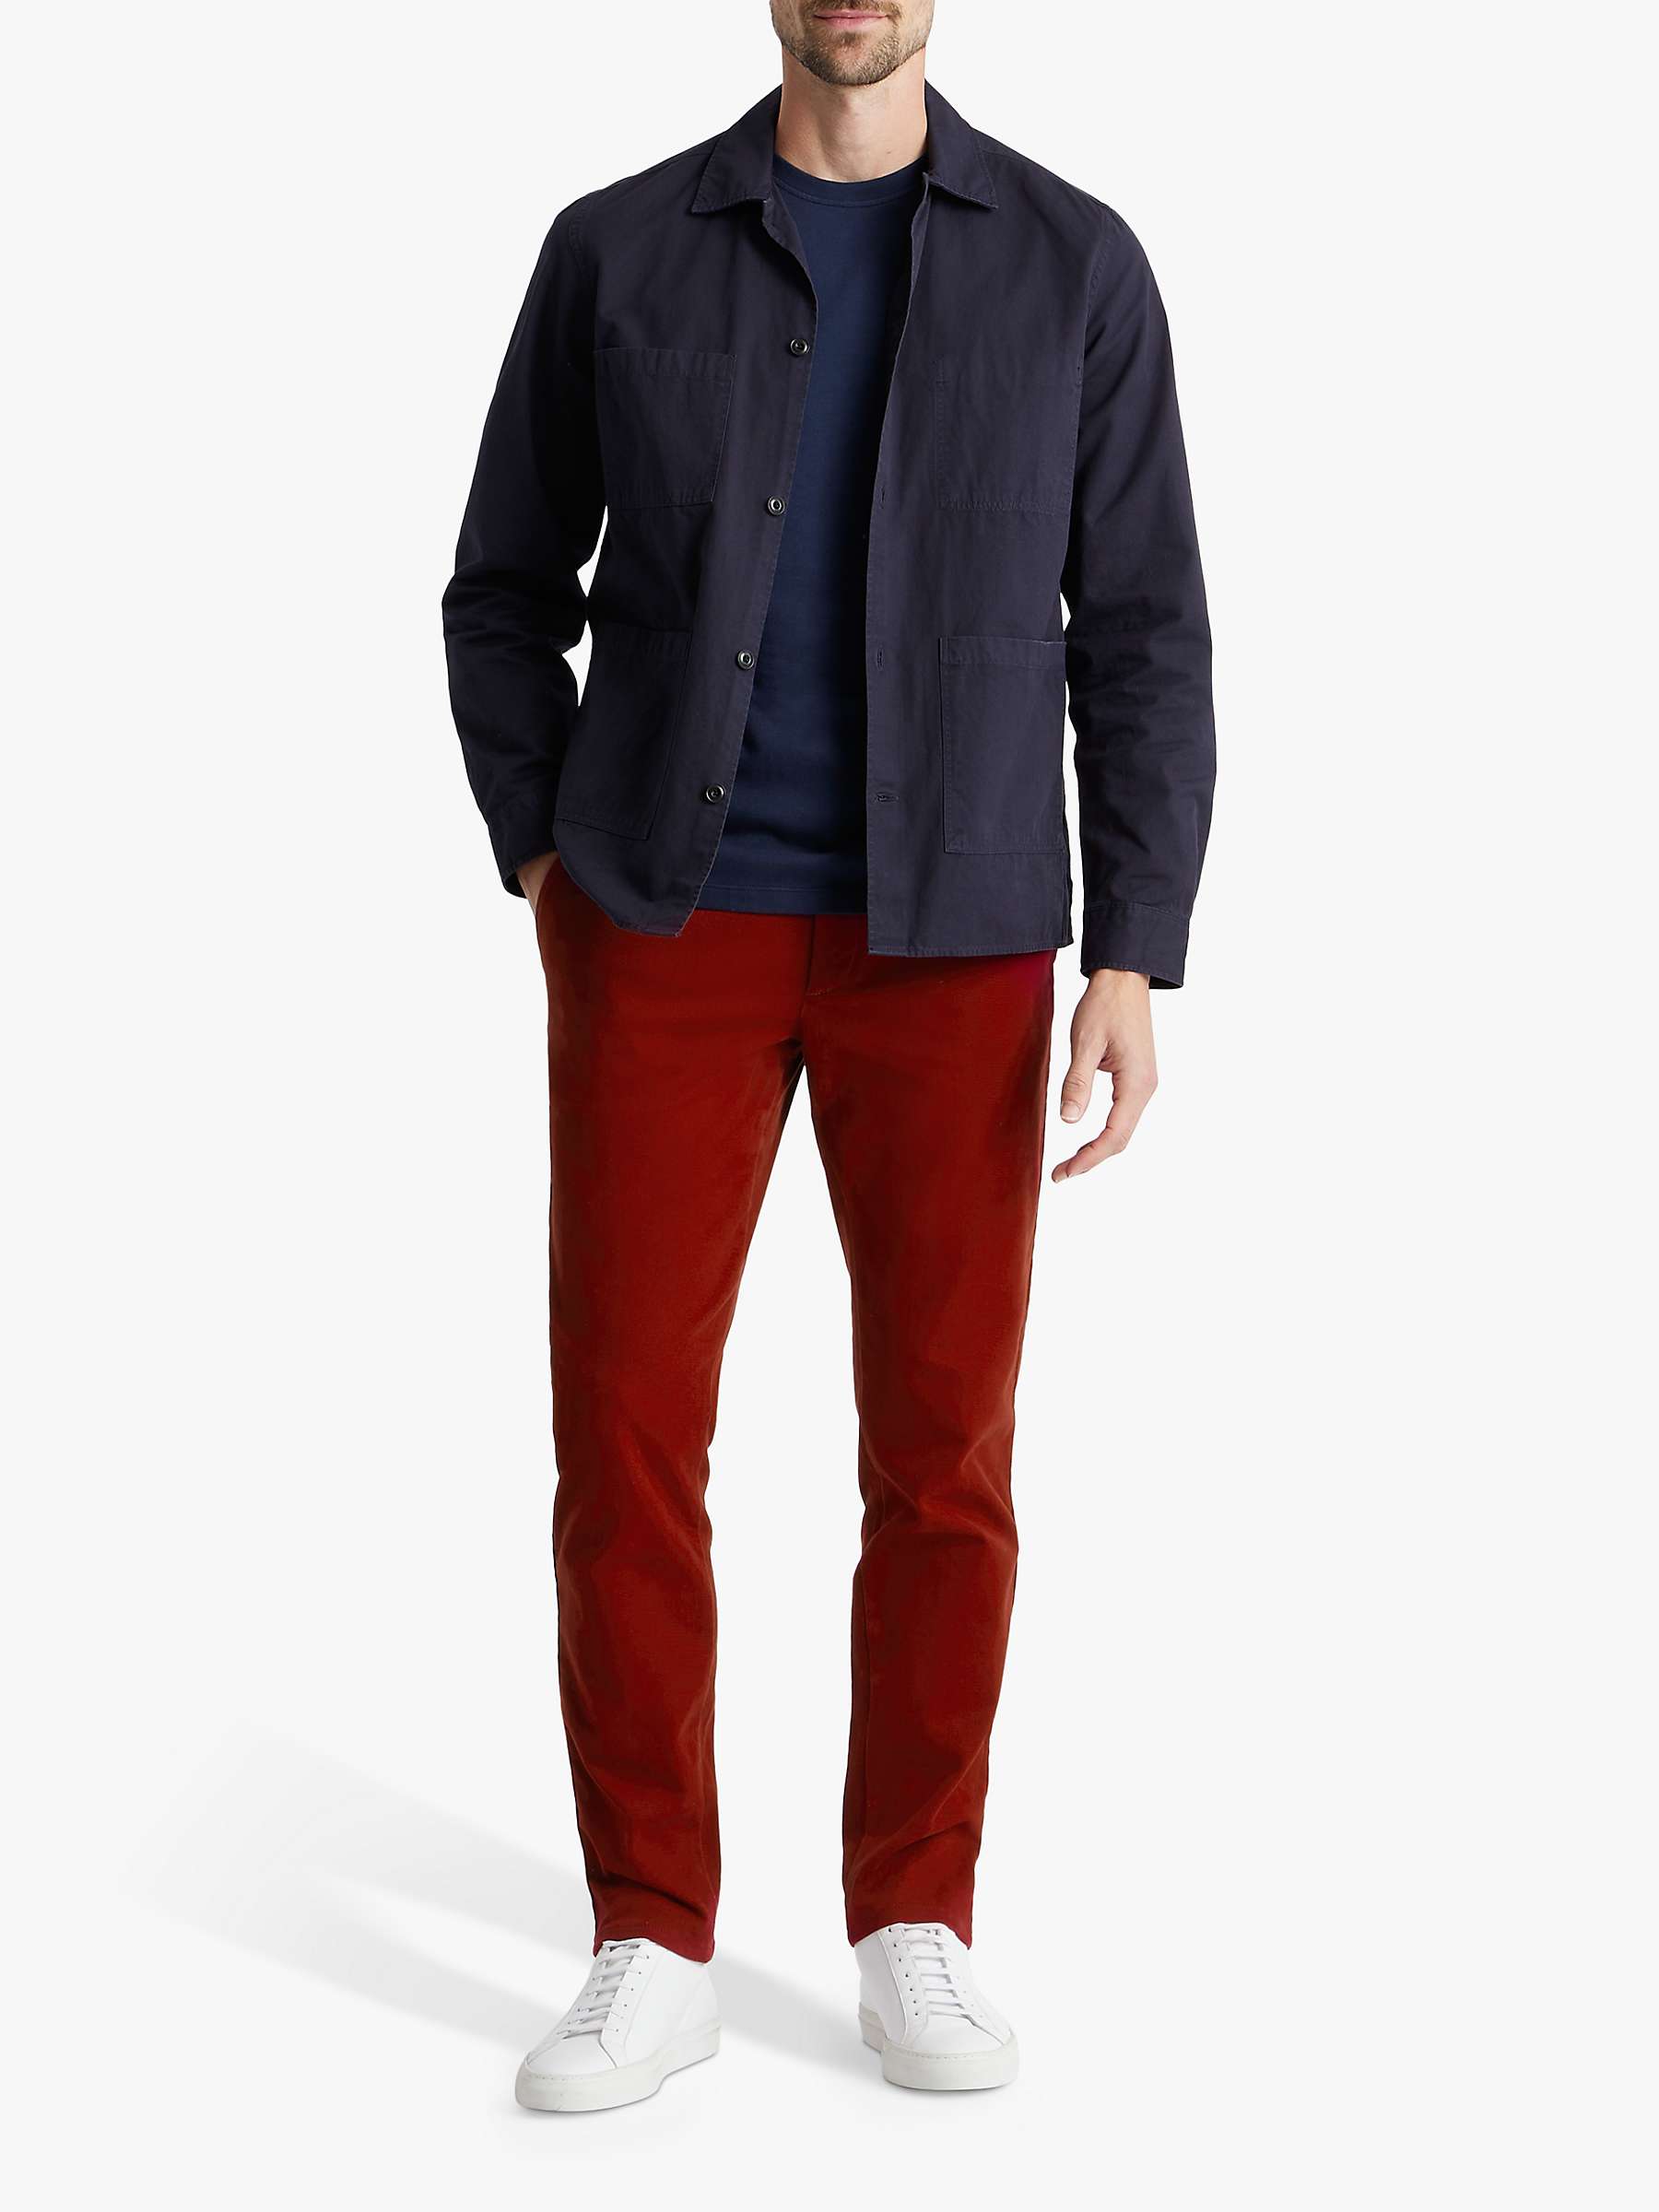 Buy SPOKE Winter Heroes Cotton Blend Broad Thigh Chinos, Maroon Online at johnlewis.com